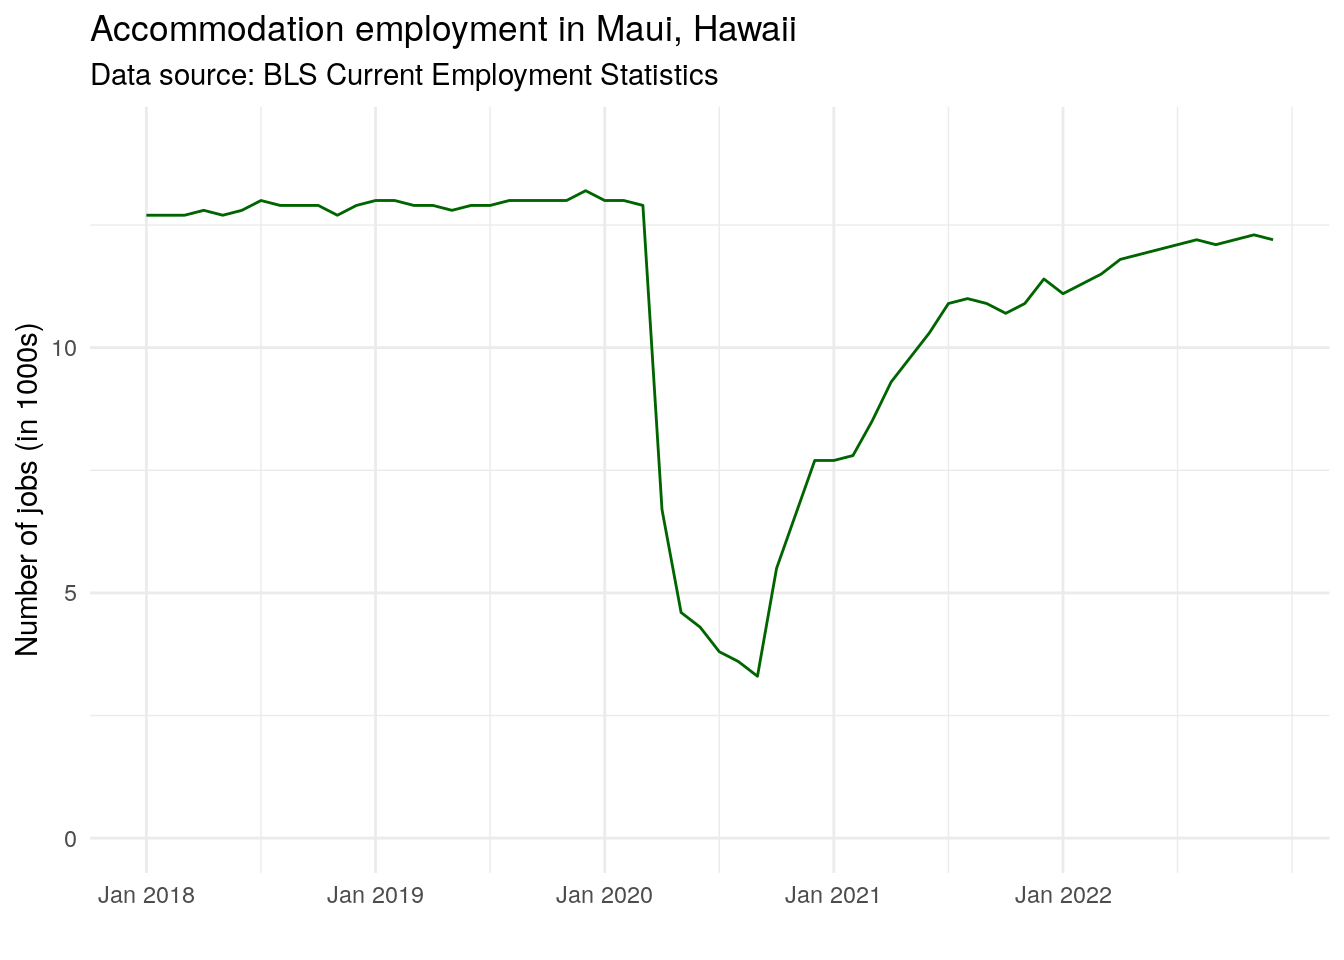 Time-series of accommodations employment in Maui, Hawaii